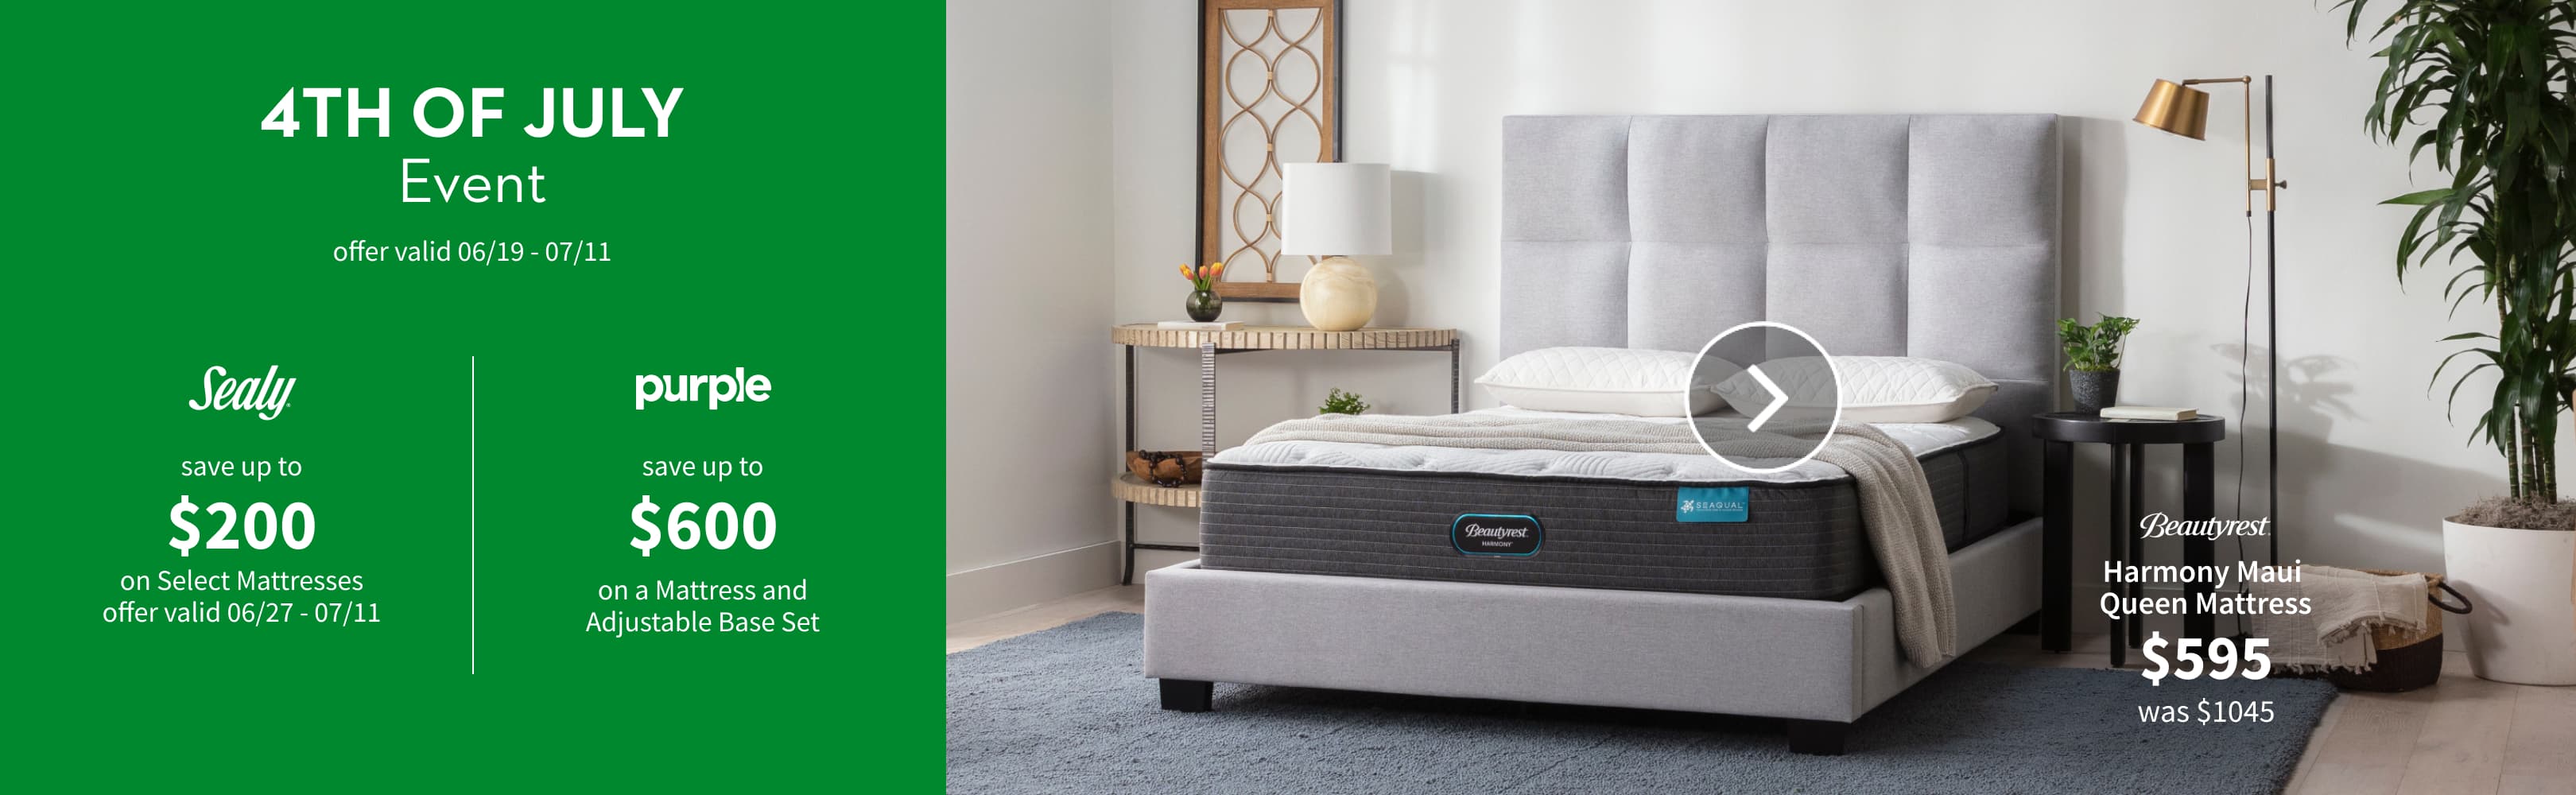 4TH OF JULY Event. offer valid 06/29 - 07/11. Sealy save up to $200 on Select Mattresses. offer valid 06/27 - 07/11. purple save up to $600 on a Mattress and Adjustable Base Set. Beautyrest Harmony Maui Queen Mattress. $595 was $1045.